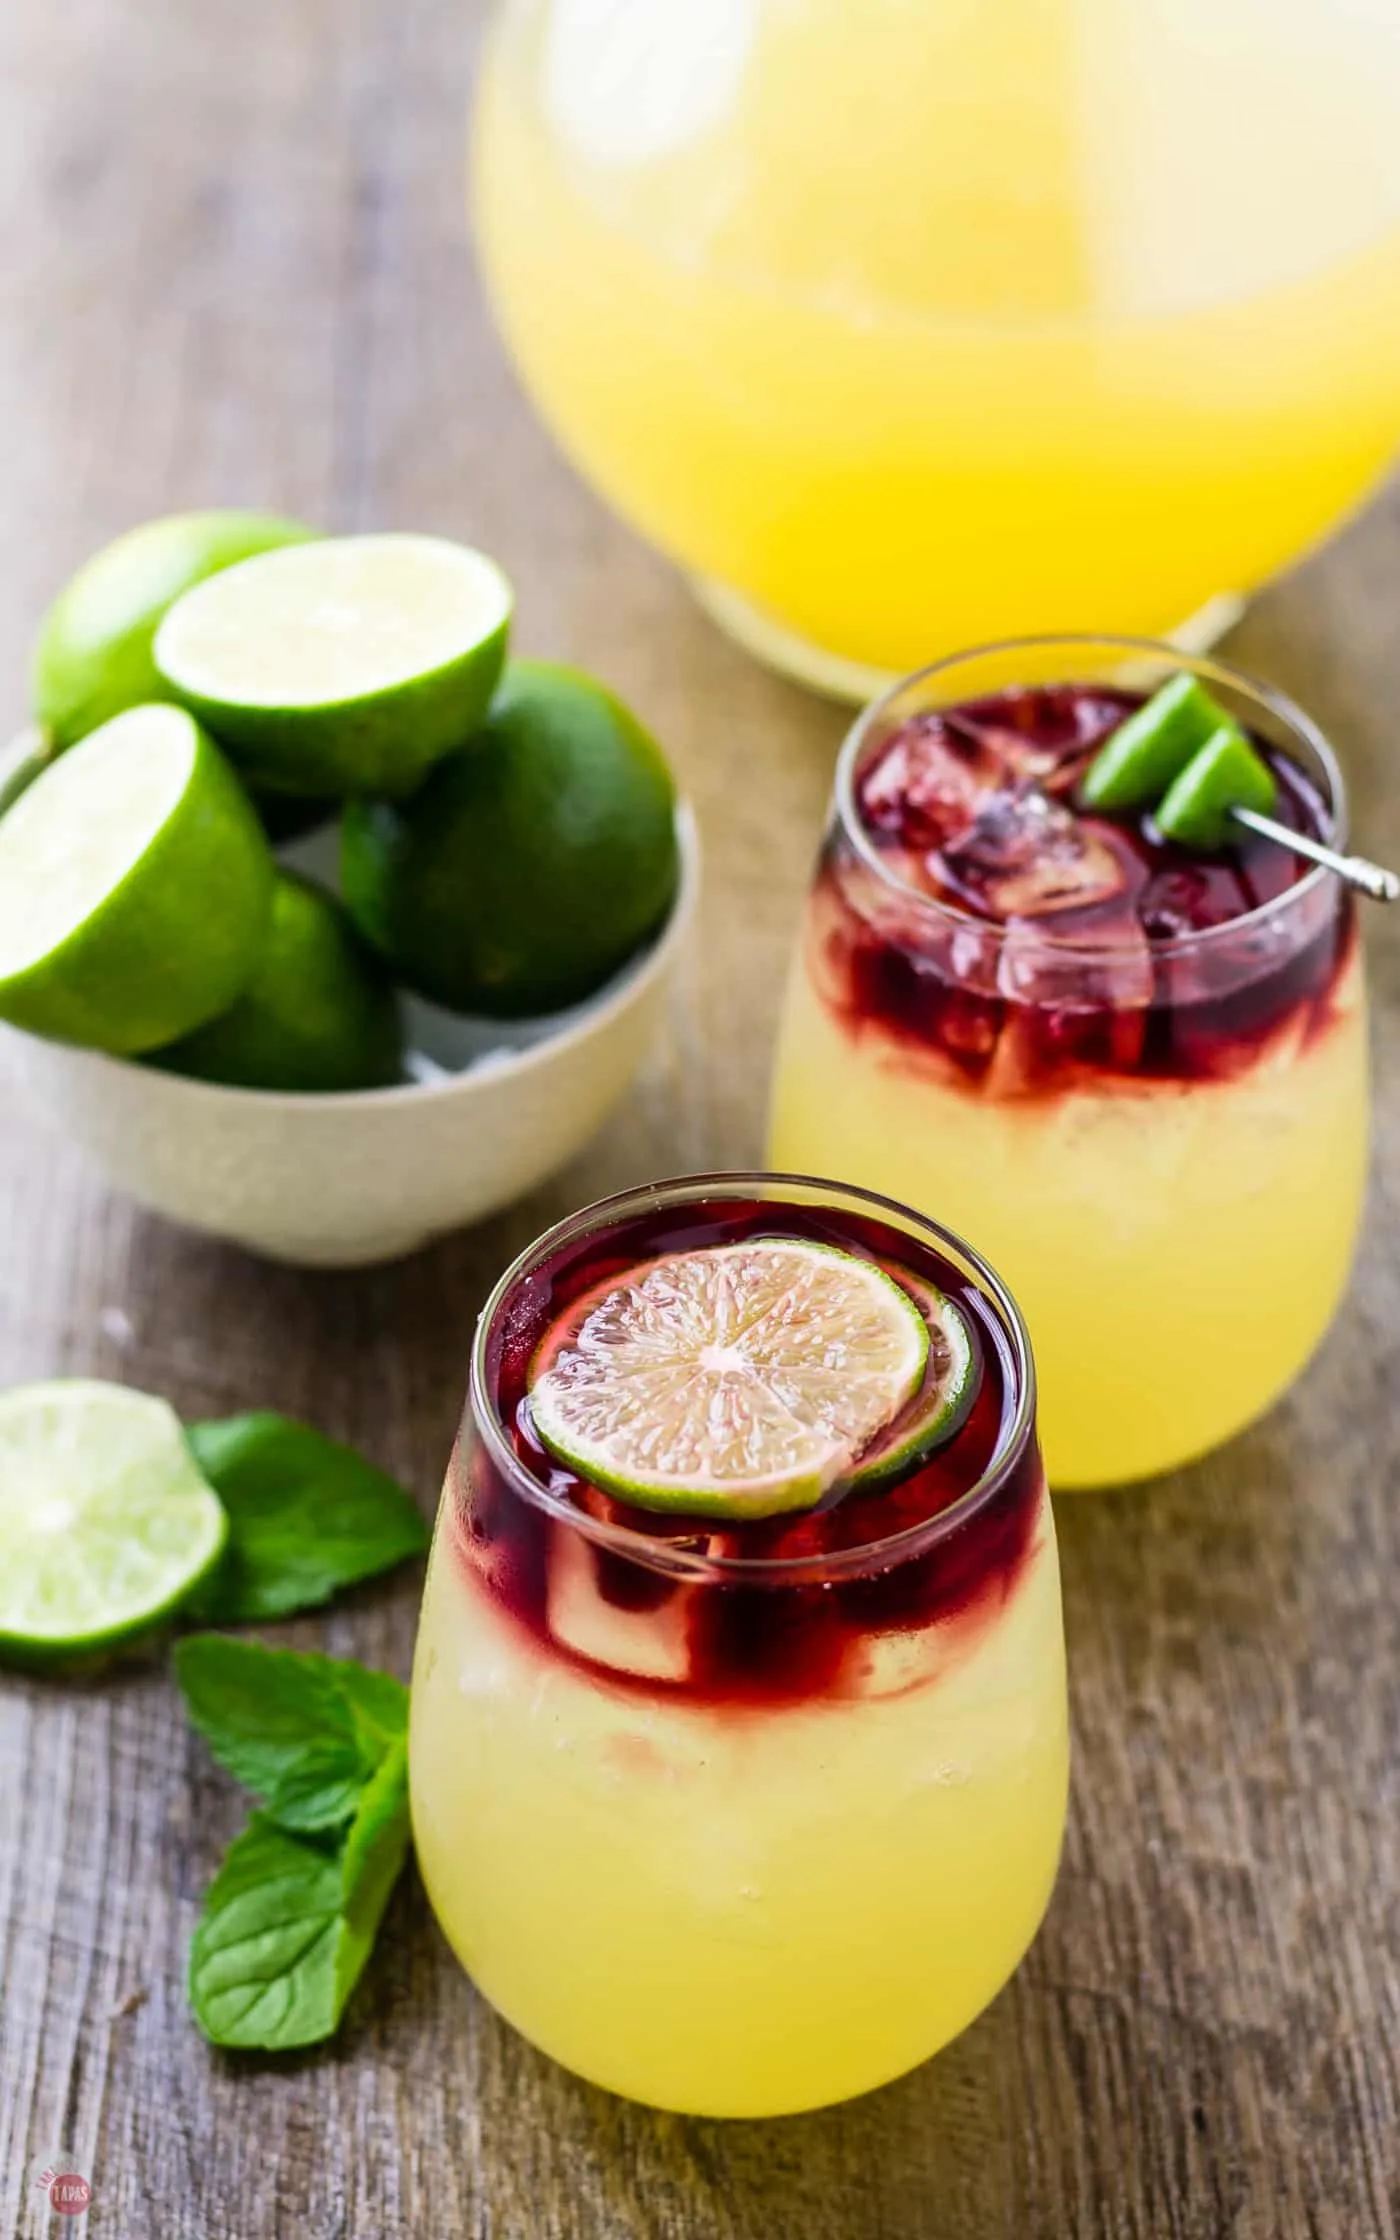 The layered look of the Wimade comes from the dark red wine or juice poured slowly on top of the limeade | Take Two Tapas | #Wimade #Wine #Limeade #HoneyLimeade #Wine #LayeredCocktail